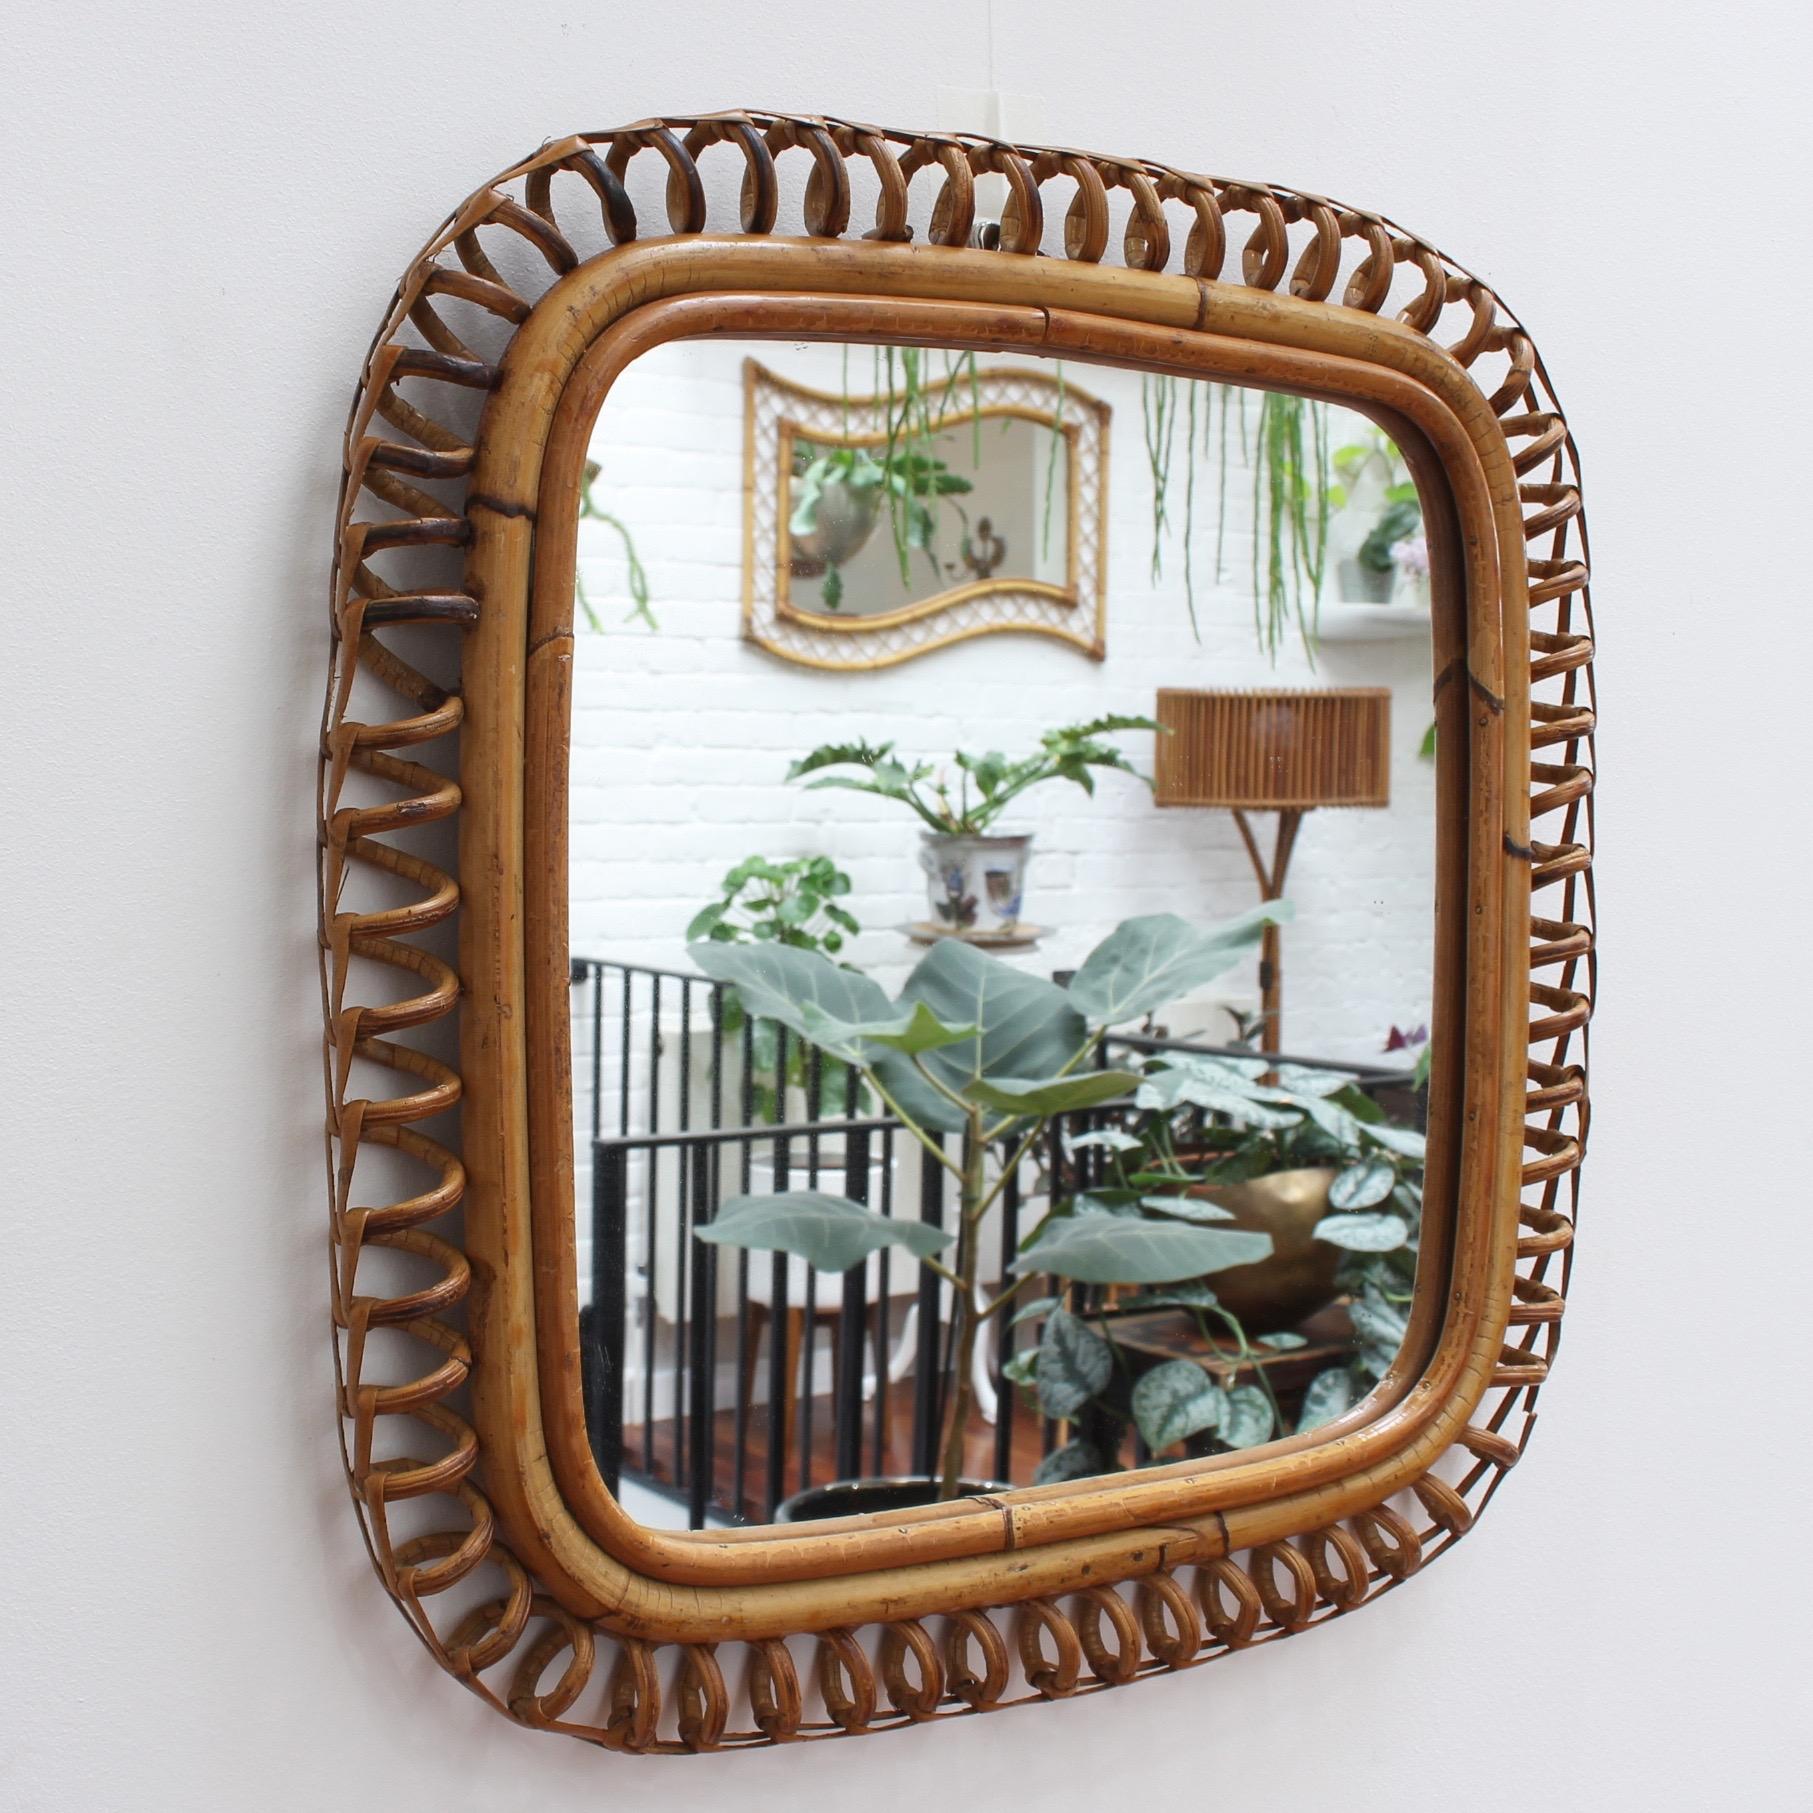 Vintage Italian rattan mirror (circa 1960s). Rarely available, this square shaped rattan mirror is a real find. The square frame is decorated on the surround with coiled bamboo reminiscent of old telephone cord. Filled with character and sunshine it